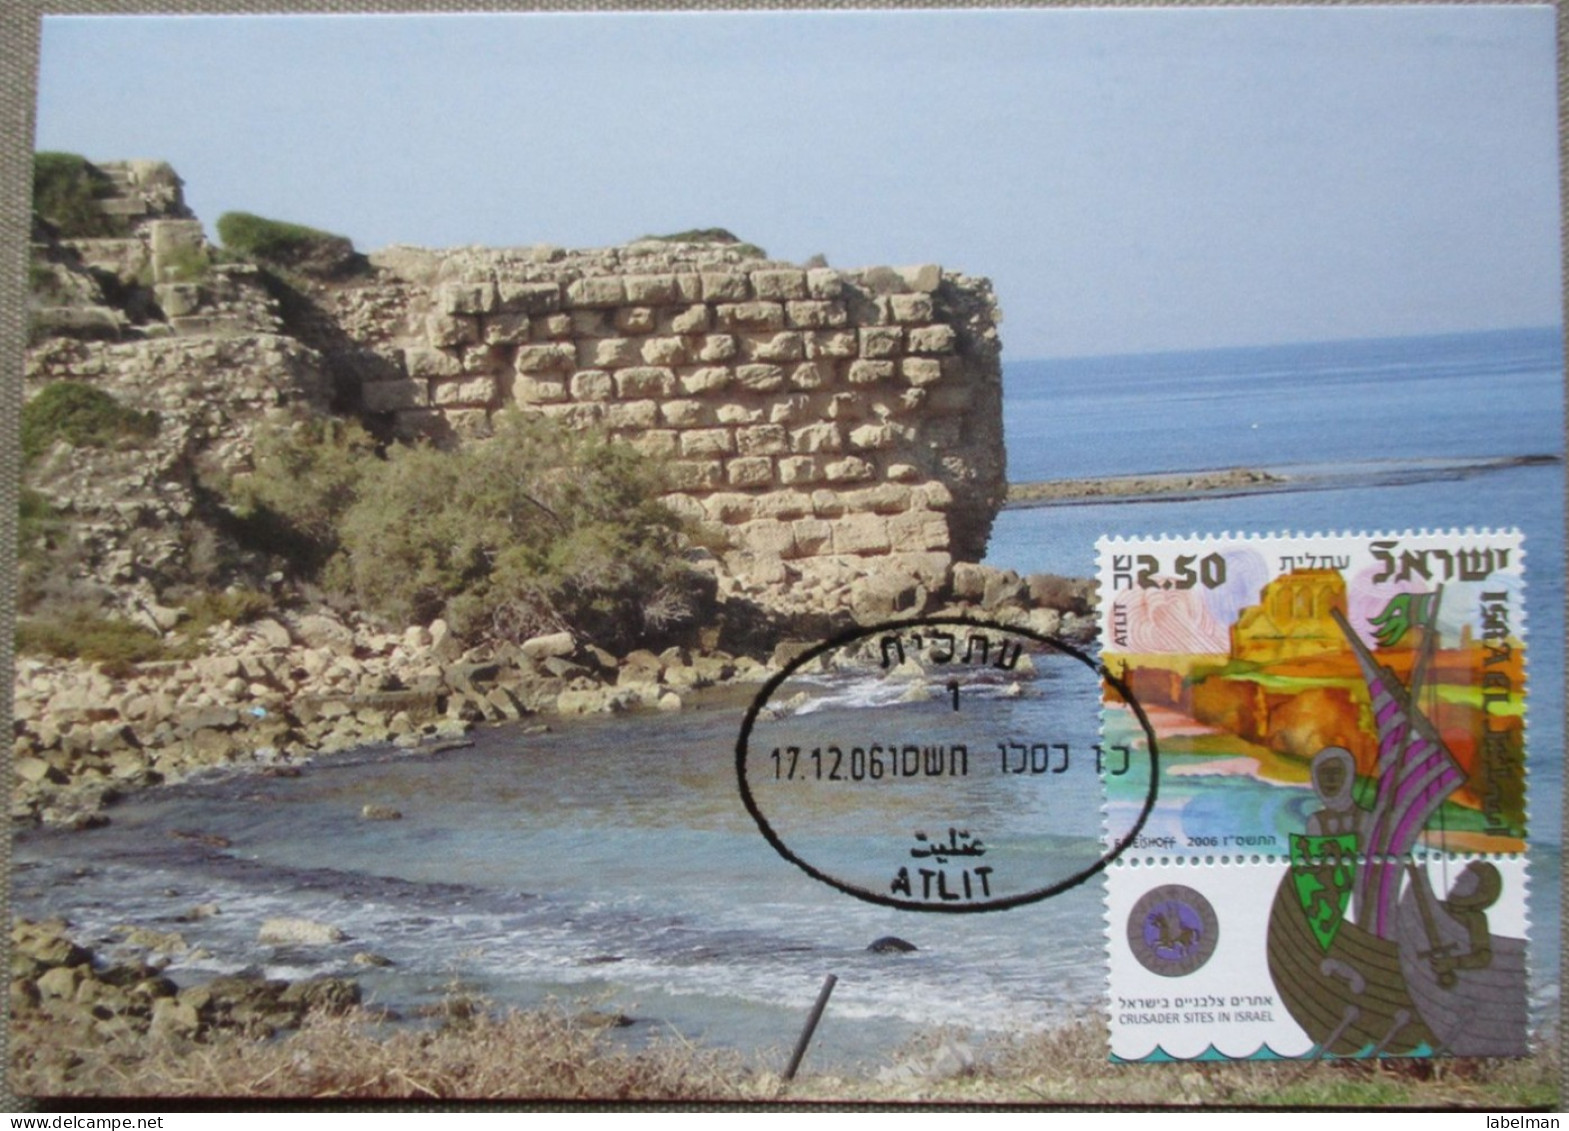 ISRAEL 2006 MAXIMUM CARD POSTCARD ATLIT FORTRESS FIRST DAY OF ISSUE CARTOLINA CARTE POSTALE POSTKARTE CARTOLINA - Cartoline Maximum